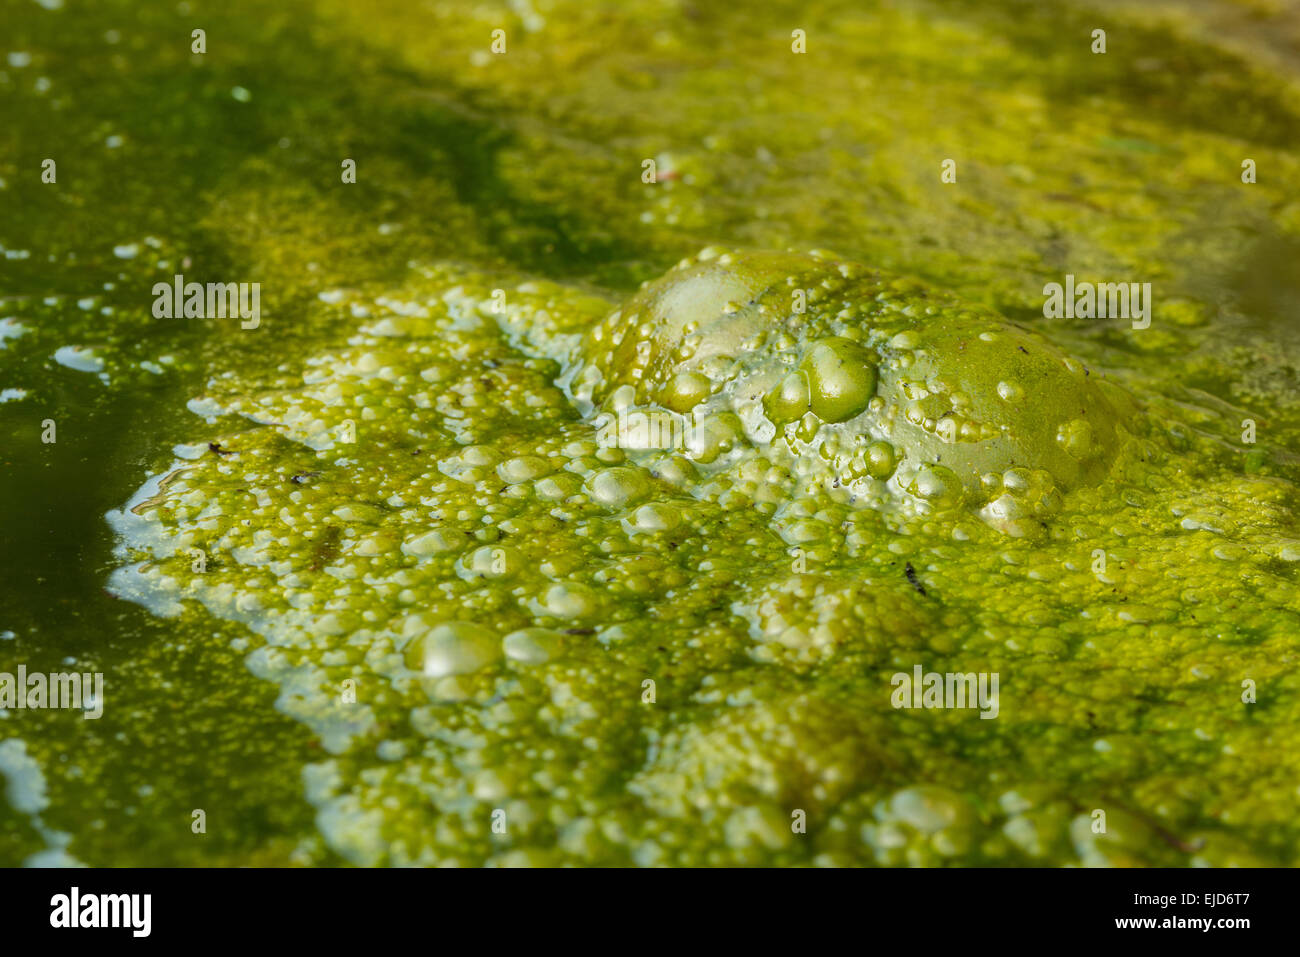 dense covering of bright filamentous green alga algae with masses of trapped bubbles oxygen gas methane rotting vegetation below Stock Photo